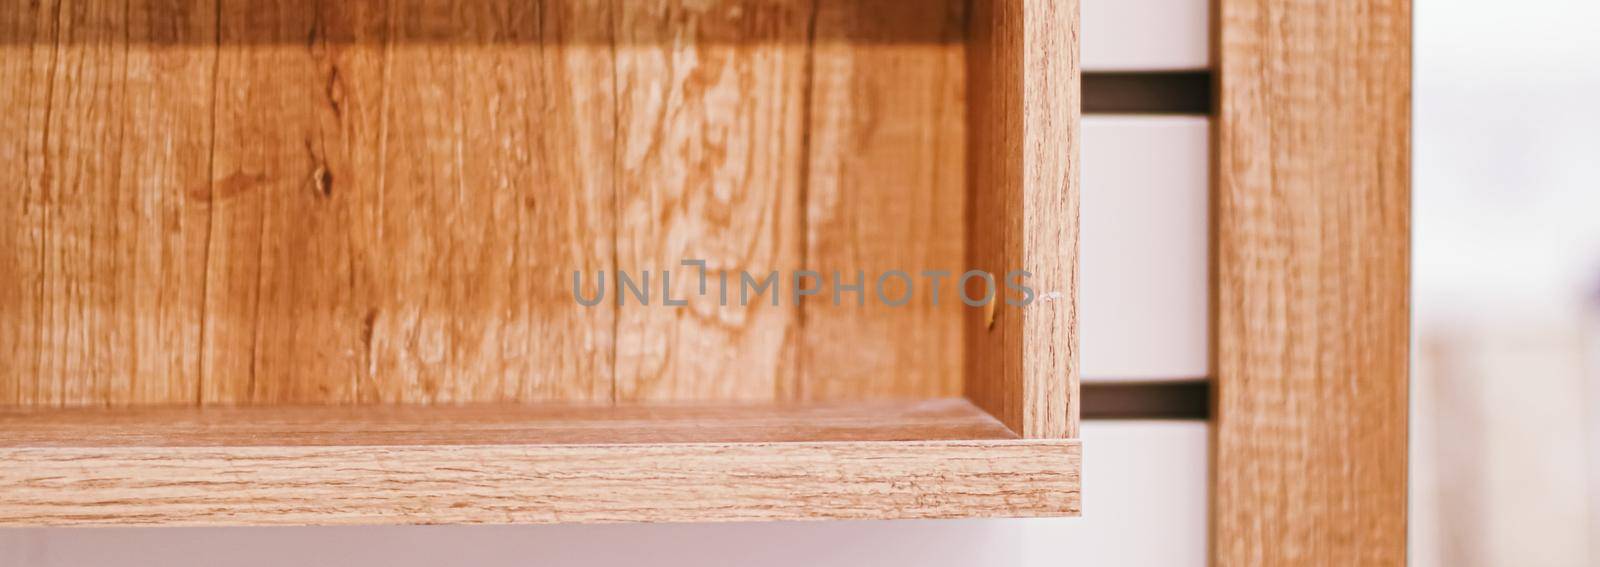 Empty wooden shelf, eco-friendly interior design and sustainable furniture materials by Anneleven